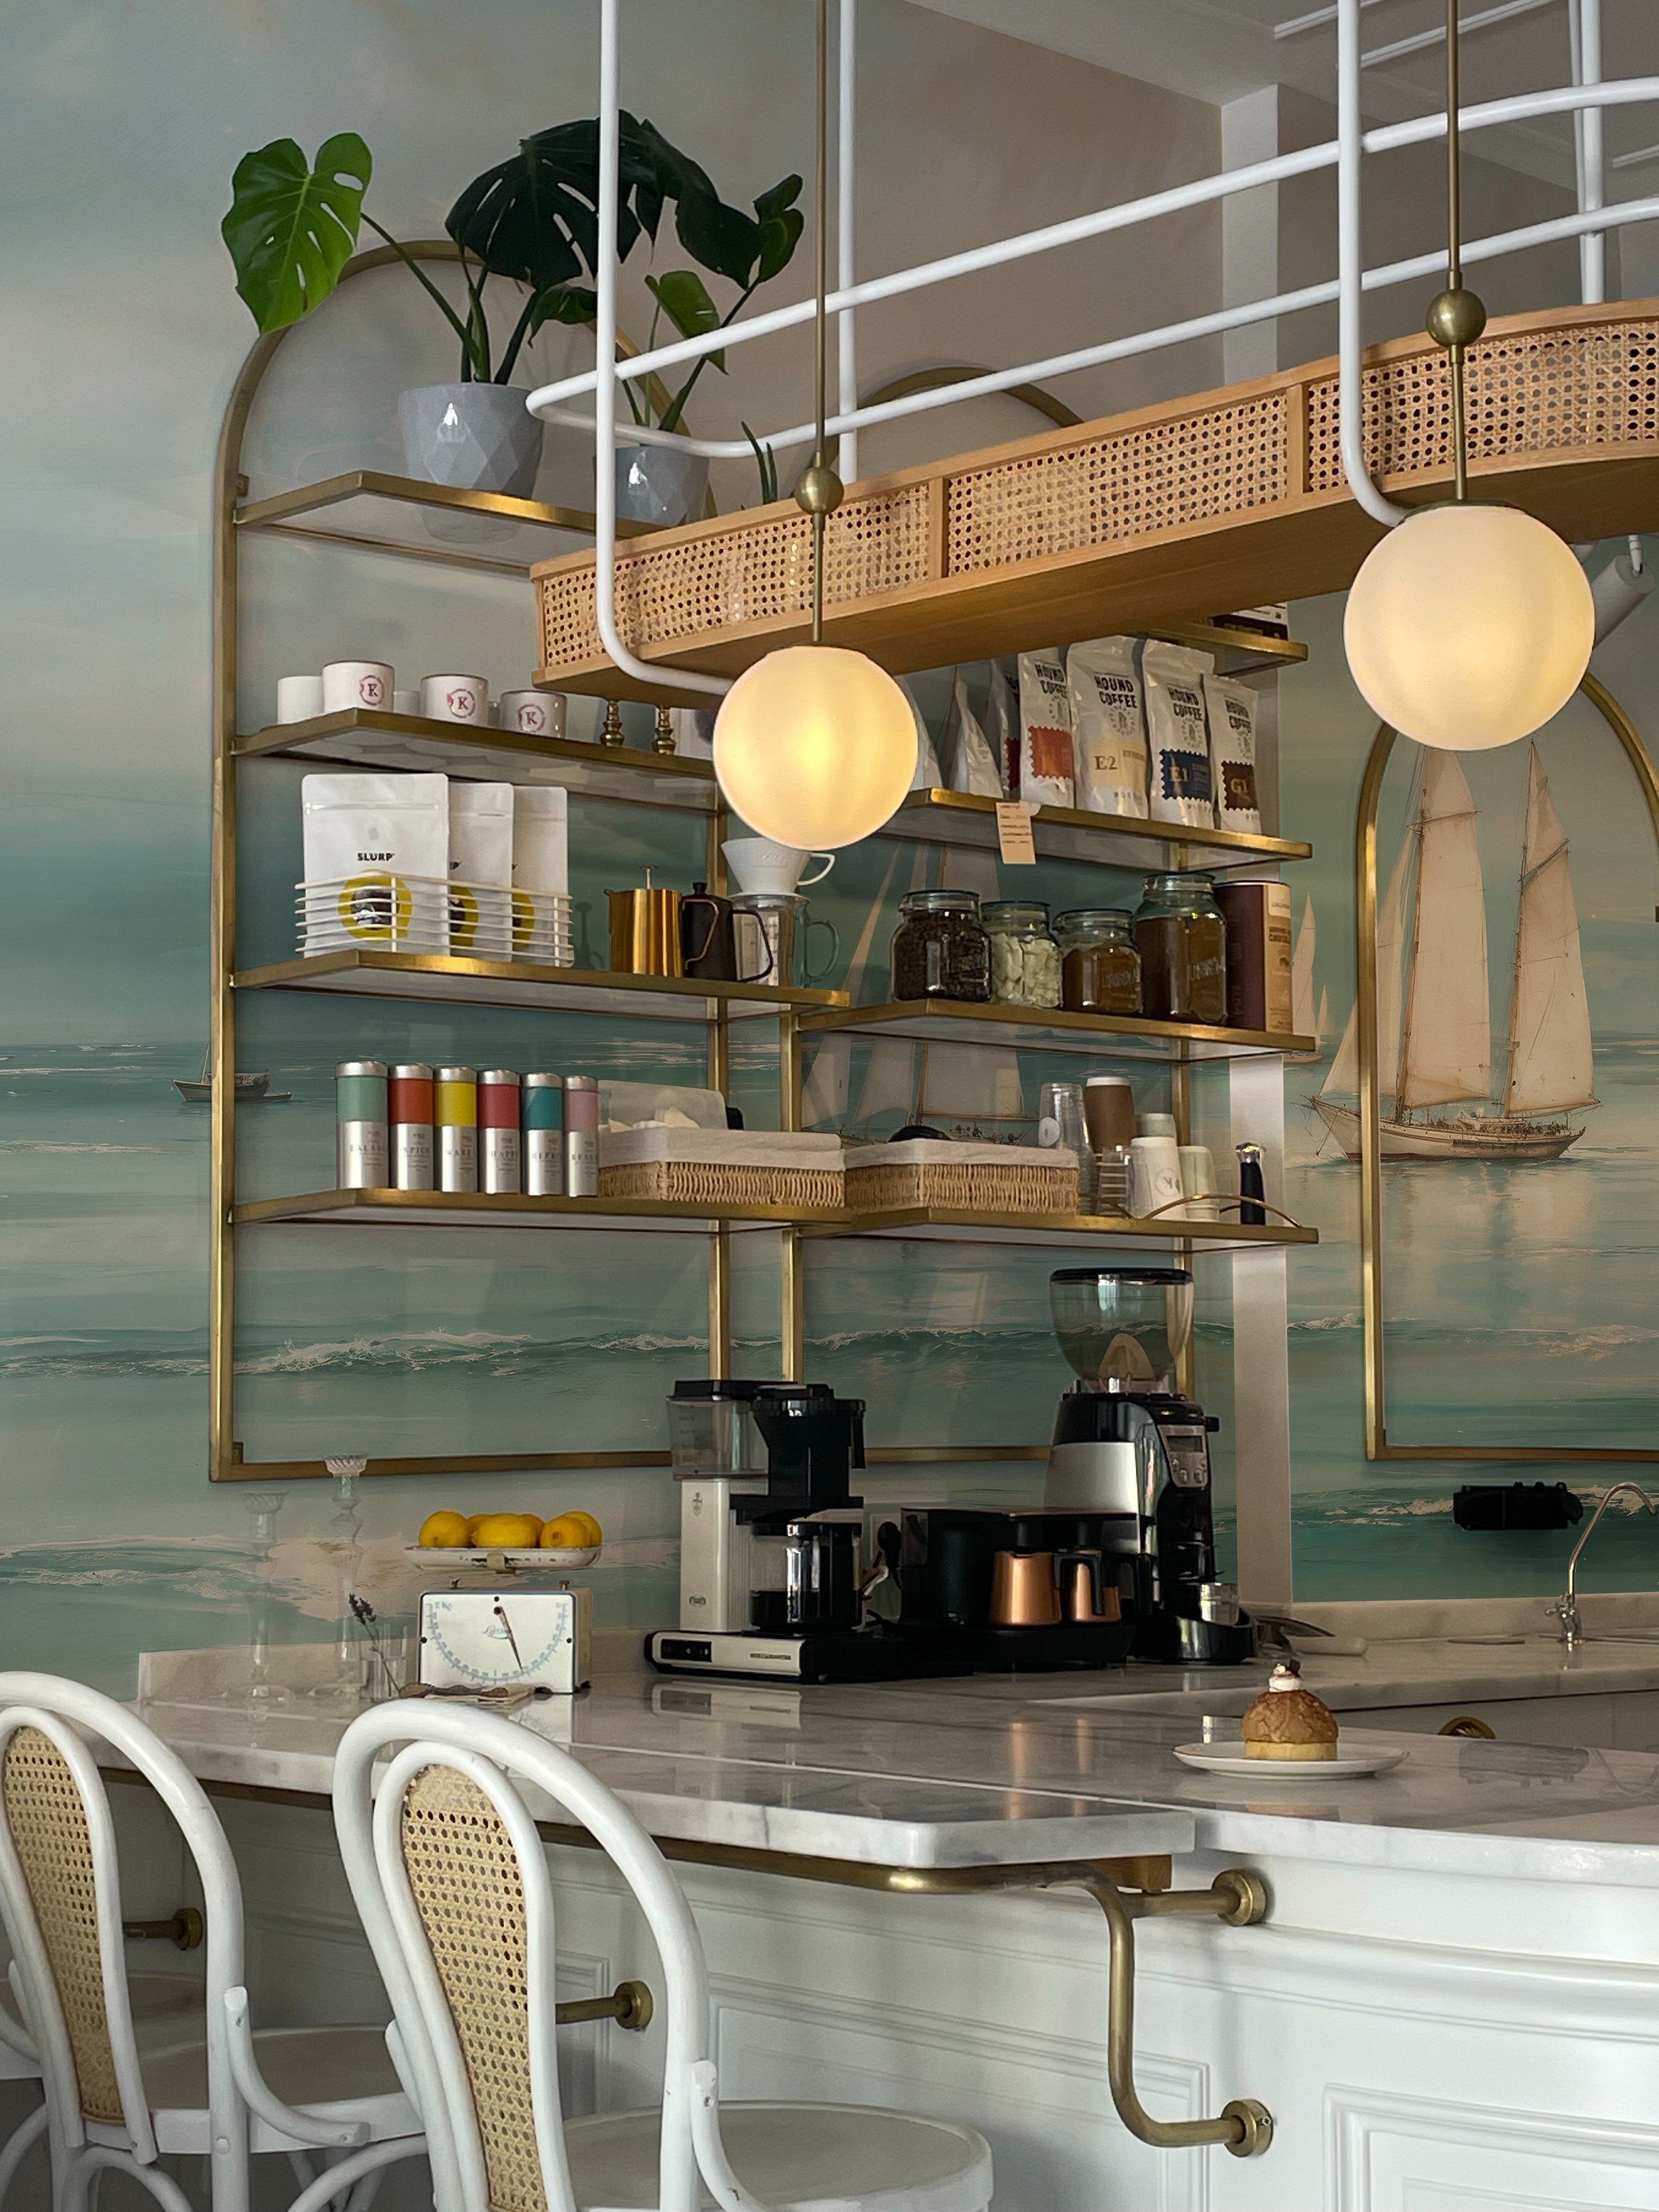 An inviting coffee bar against the Seaside Wallpaper Mural showcasing sailboats on a vivid sea. The bar is equipped with modern appliances and open shelving filled with coffee supplies and plants, enhancing the fresh, nautical theme.